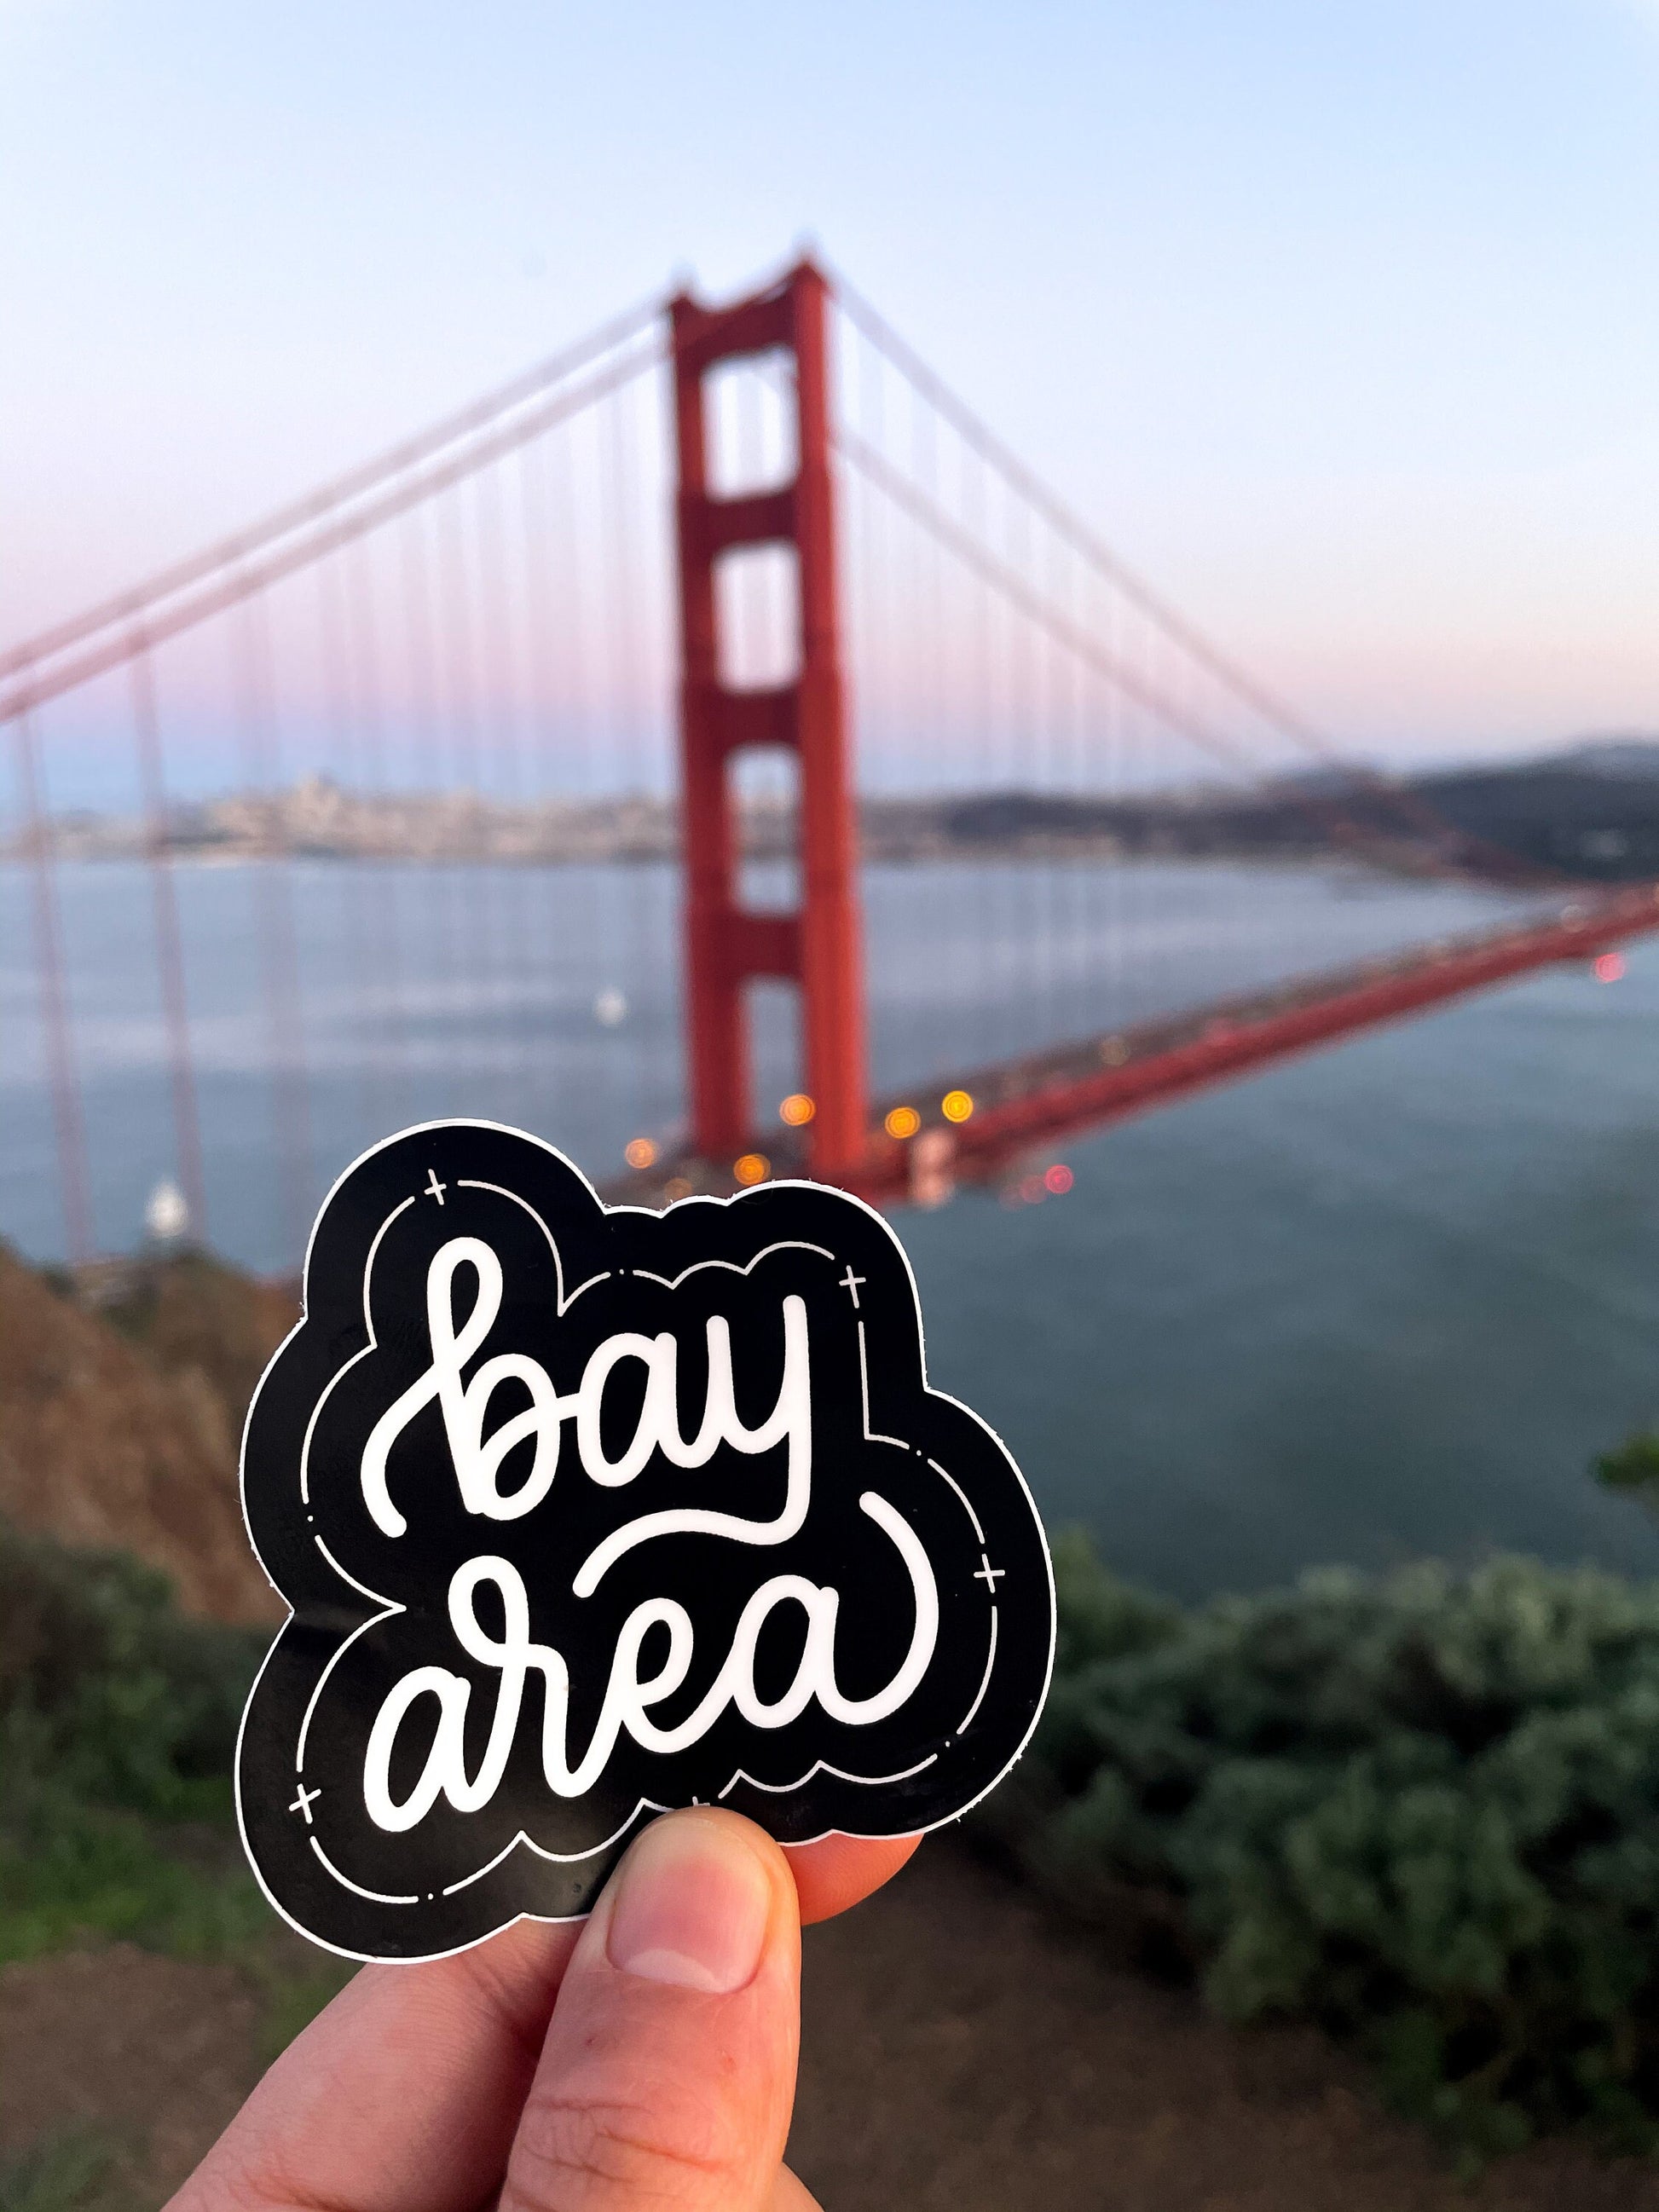 A hand holding a black and white JaneLi.Co sticker that says "Bay Area" in cursive lettering in front of the Golden Gate Bridge in San Francisco, California.